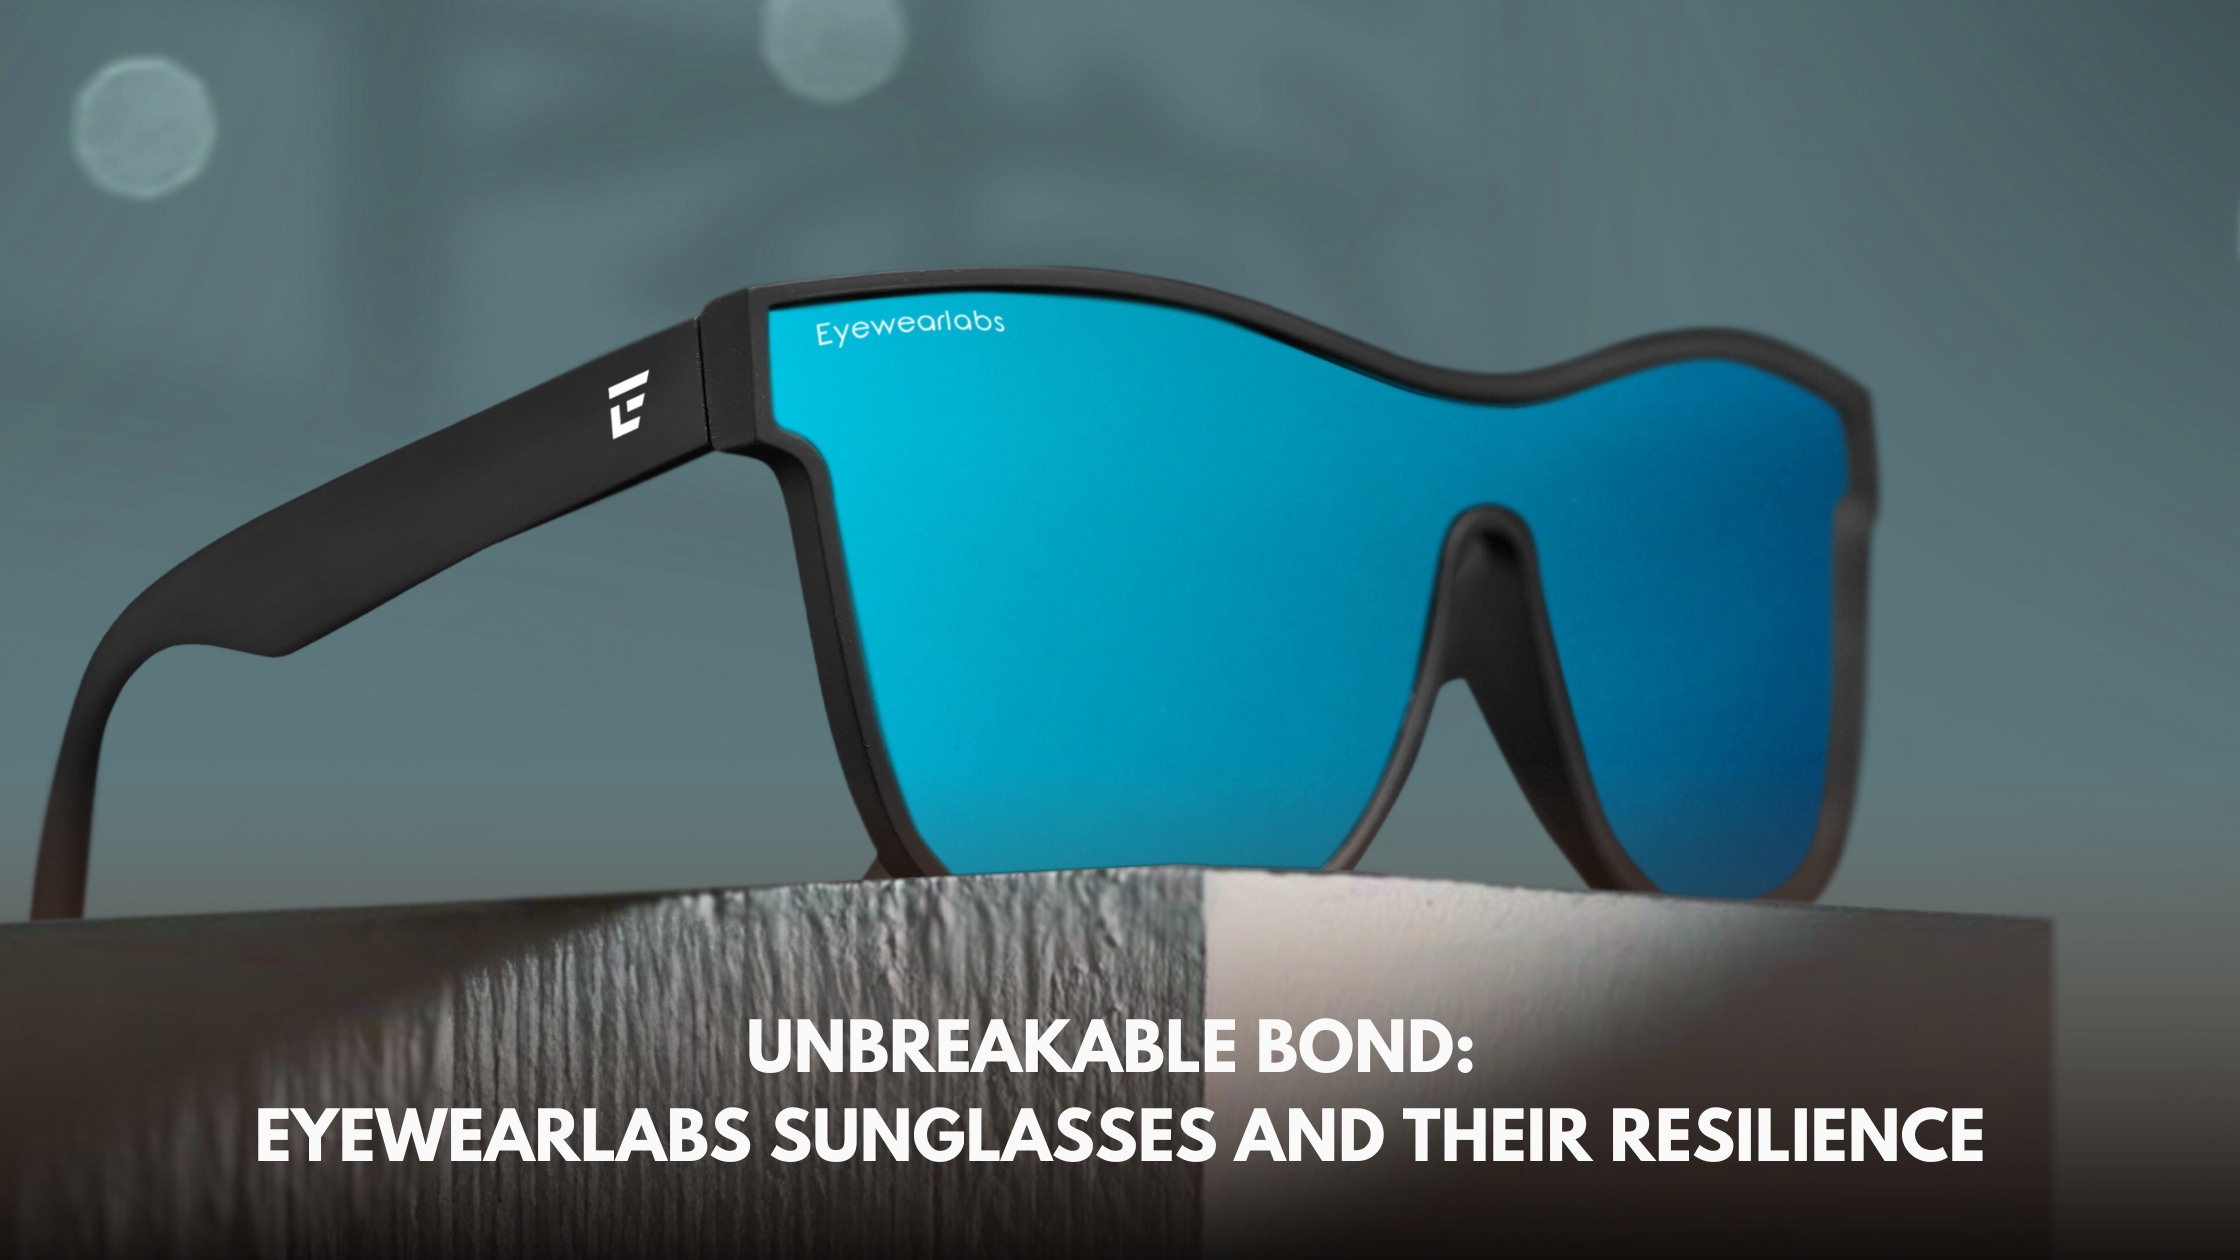 Unbreakable Bond: Eyewearlabs Sunglasses and Their Resilience